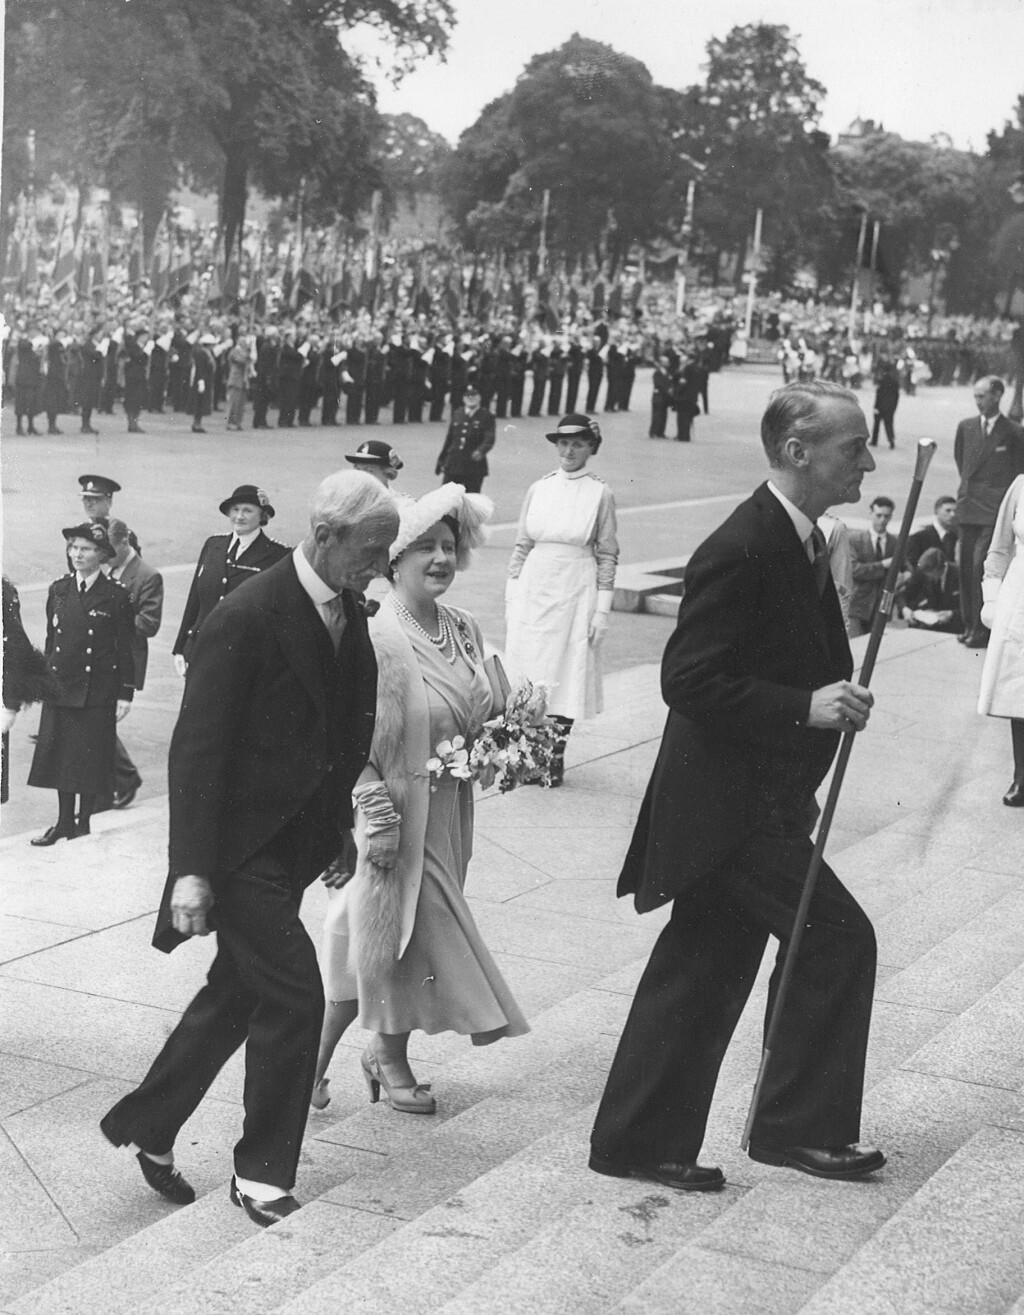 Visit of Her Majesty the Queen 18 July 1951 [Lee holding ceremonial staff]